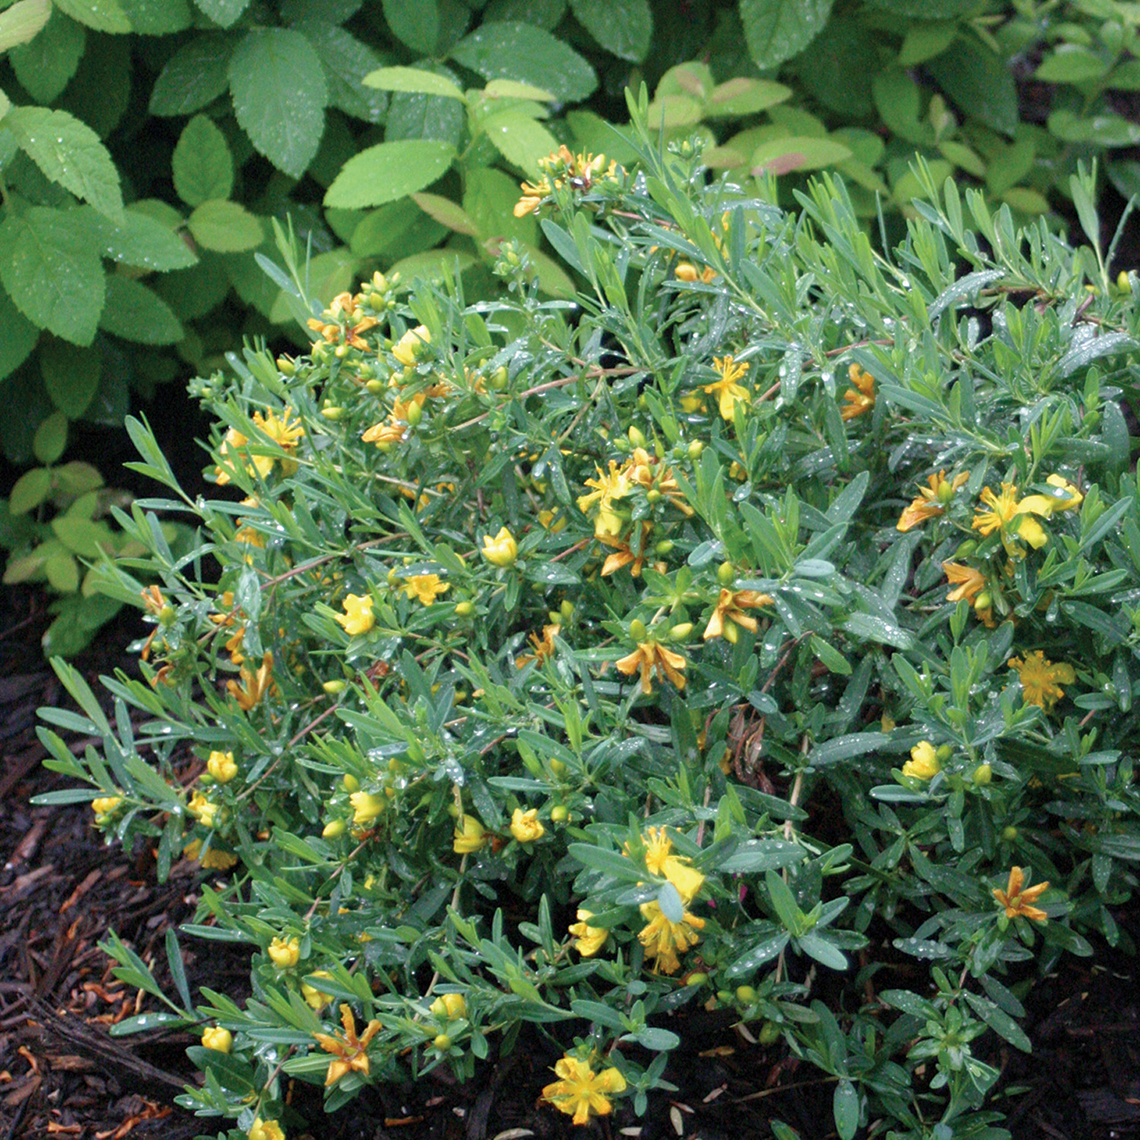 A specimen of Blue Velvet hypericum in the landscape showing its rounded habit and yellow flowers